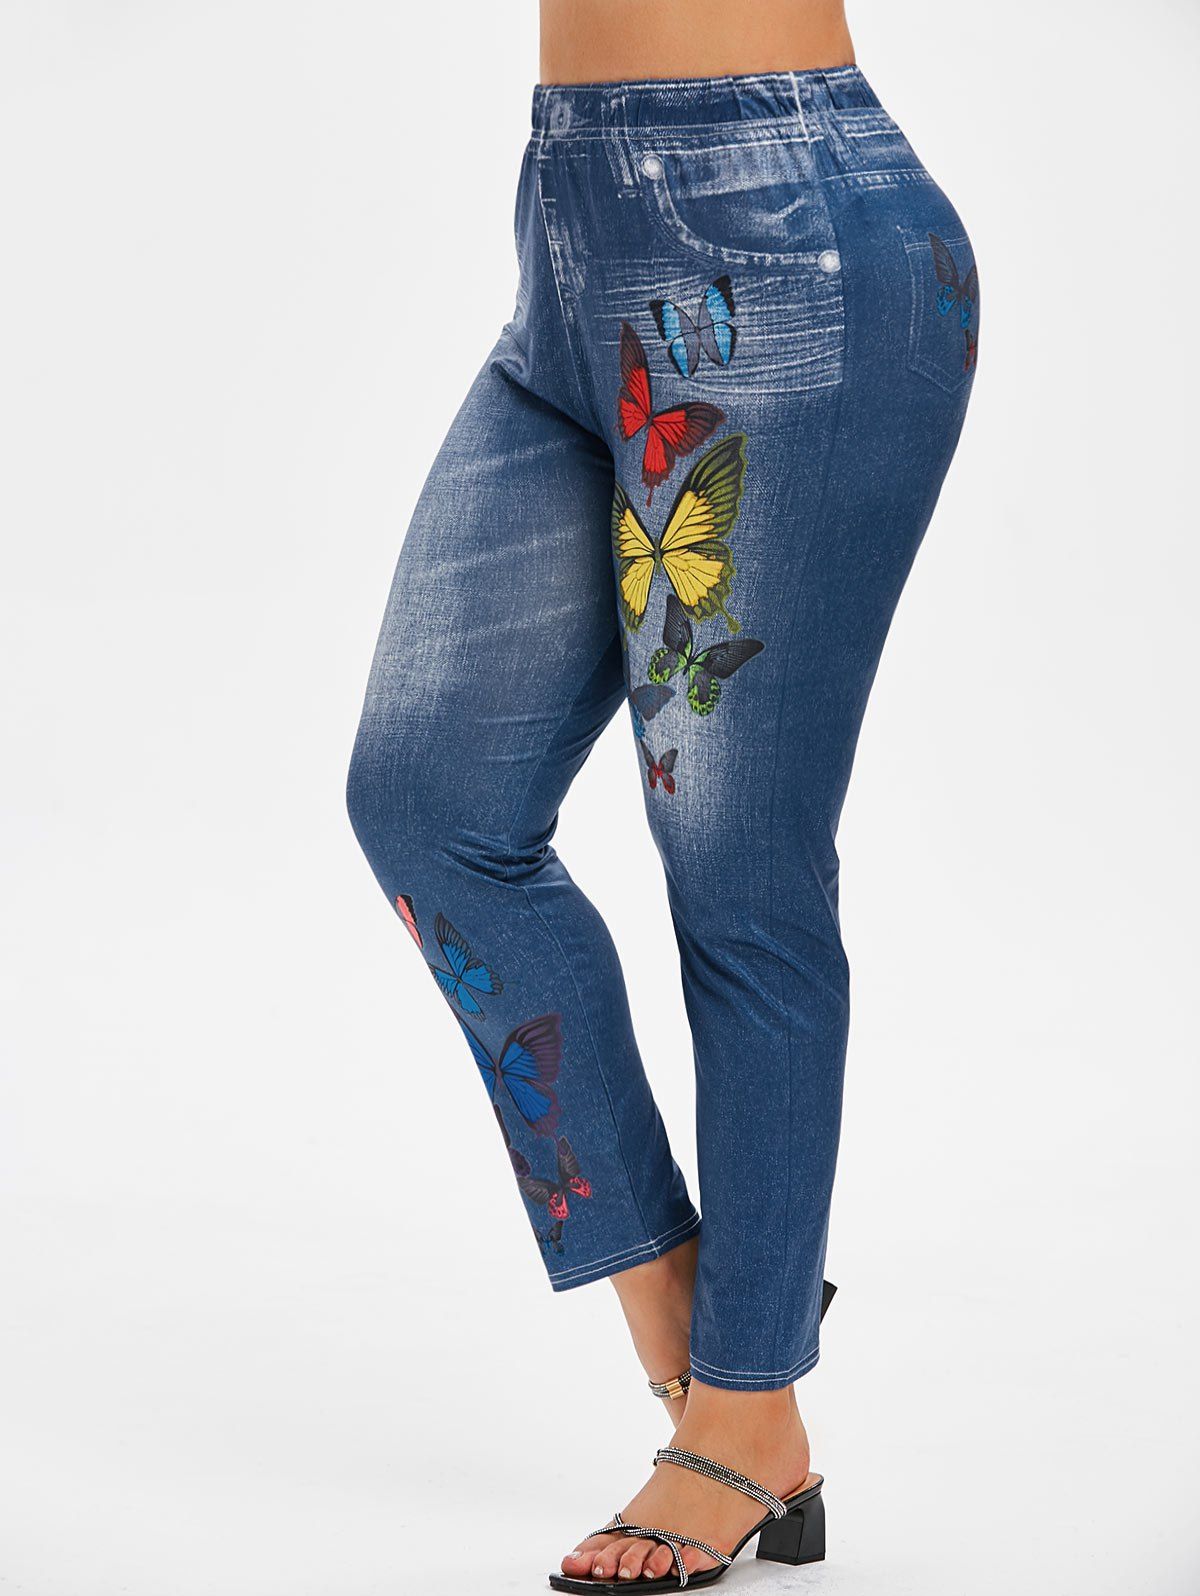 Plus Size Colorful Butterfly 3D Pattern High Rise Jeggings - BLUE 5X